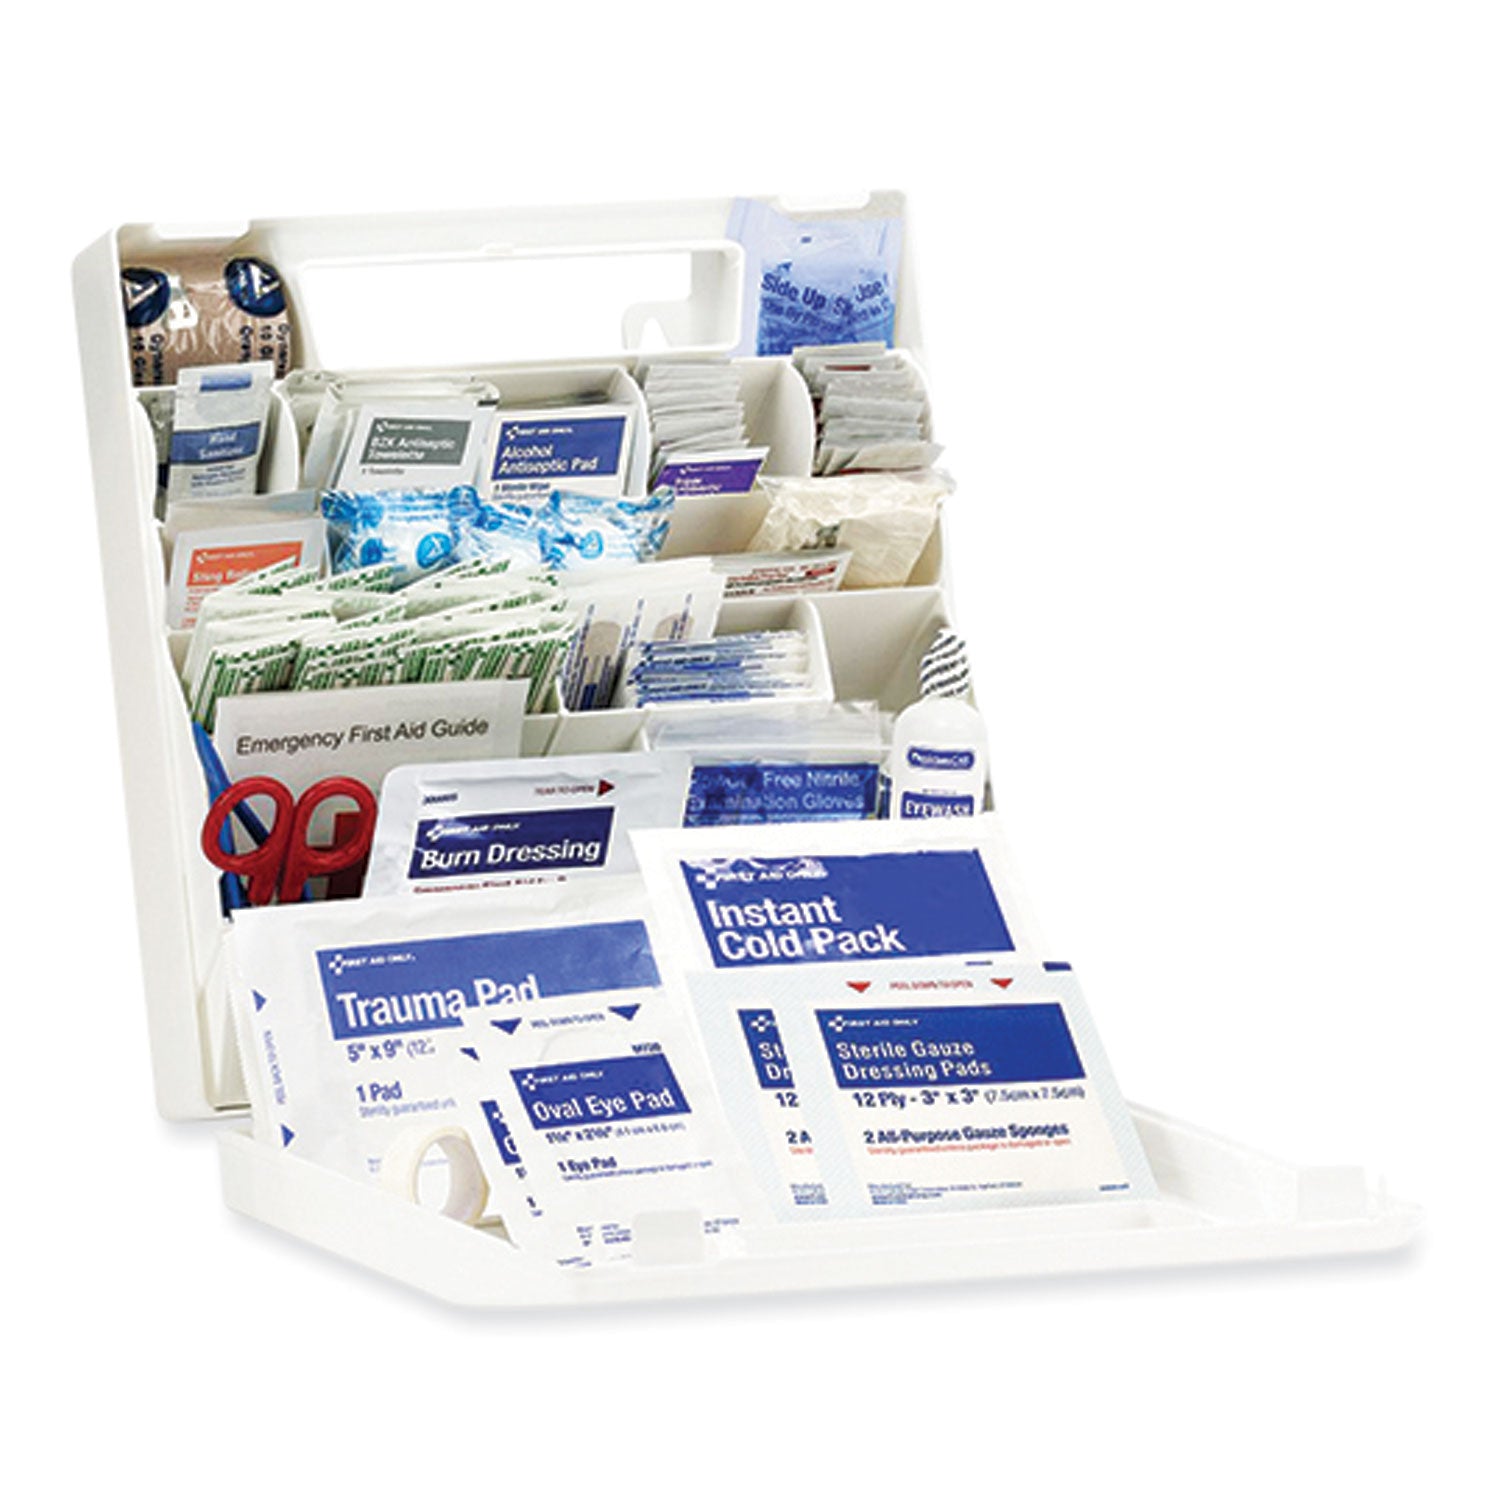 ansi-2021-first-aid-kit-for-50-people-184-pieces-plastic-case_fao91329 - 4